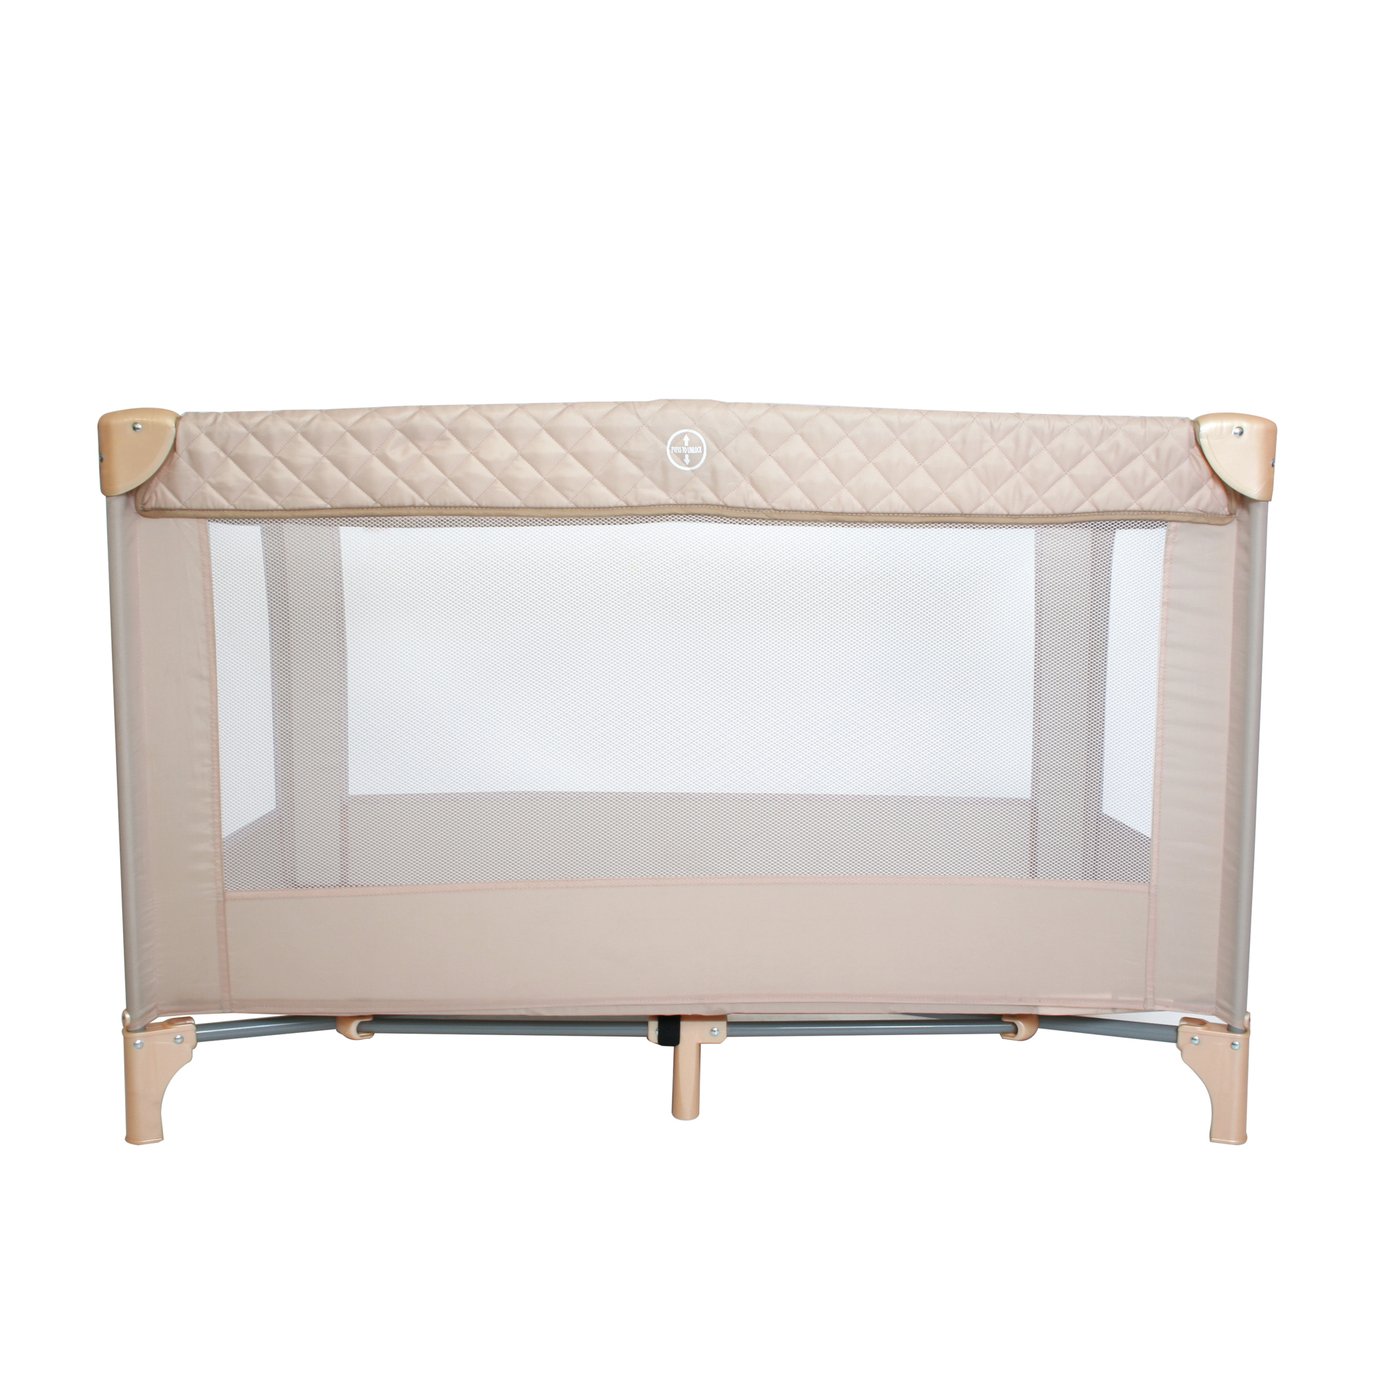 My Babiie Blush Pink Travel Cot Review